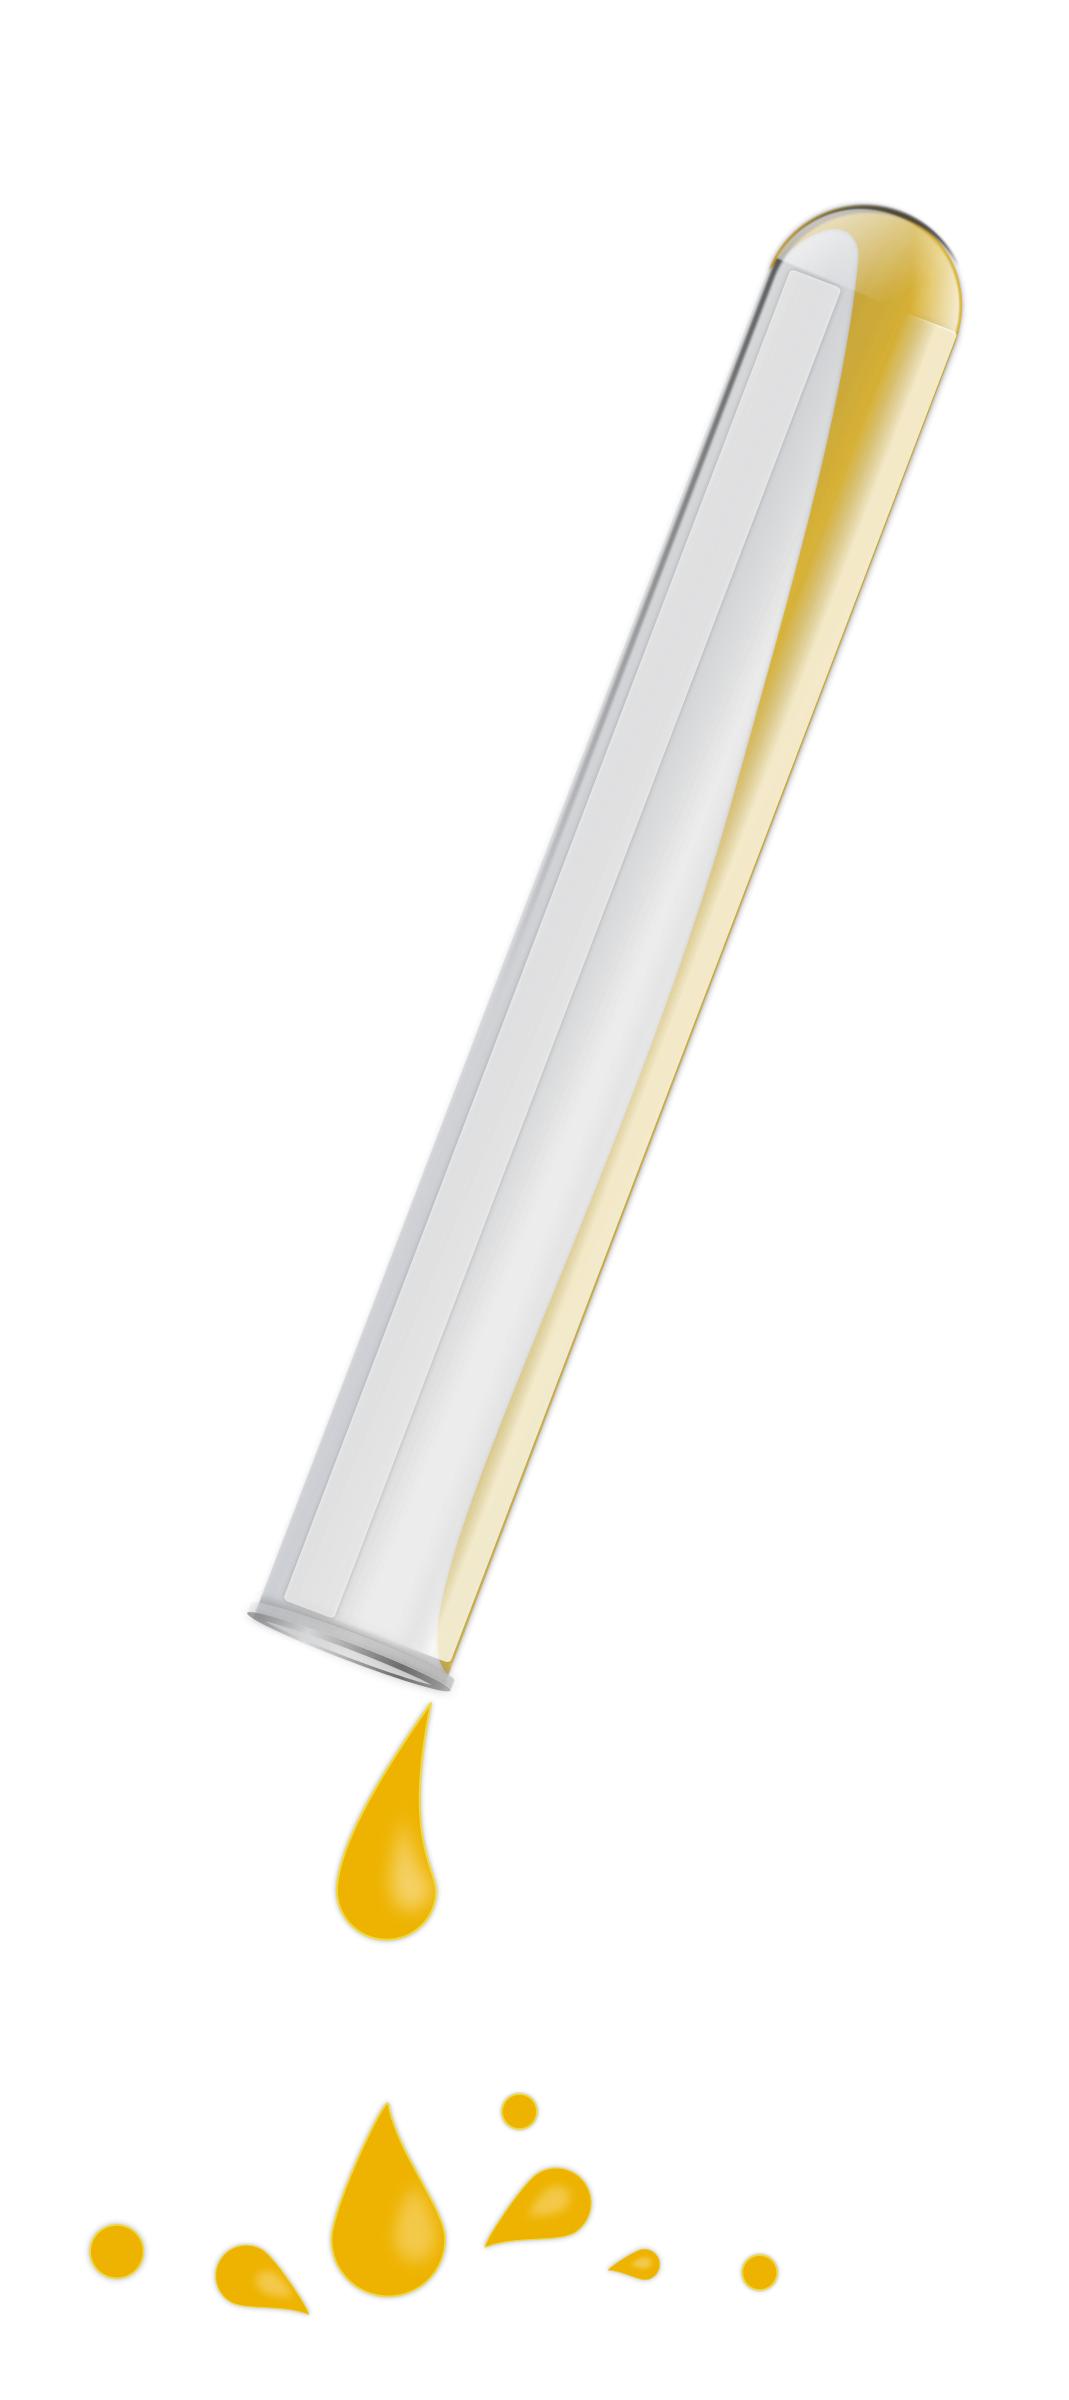 Test tube dripping png